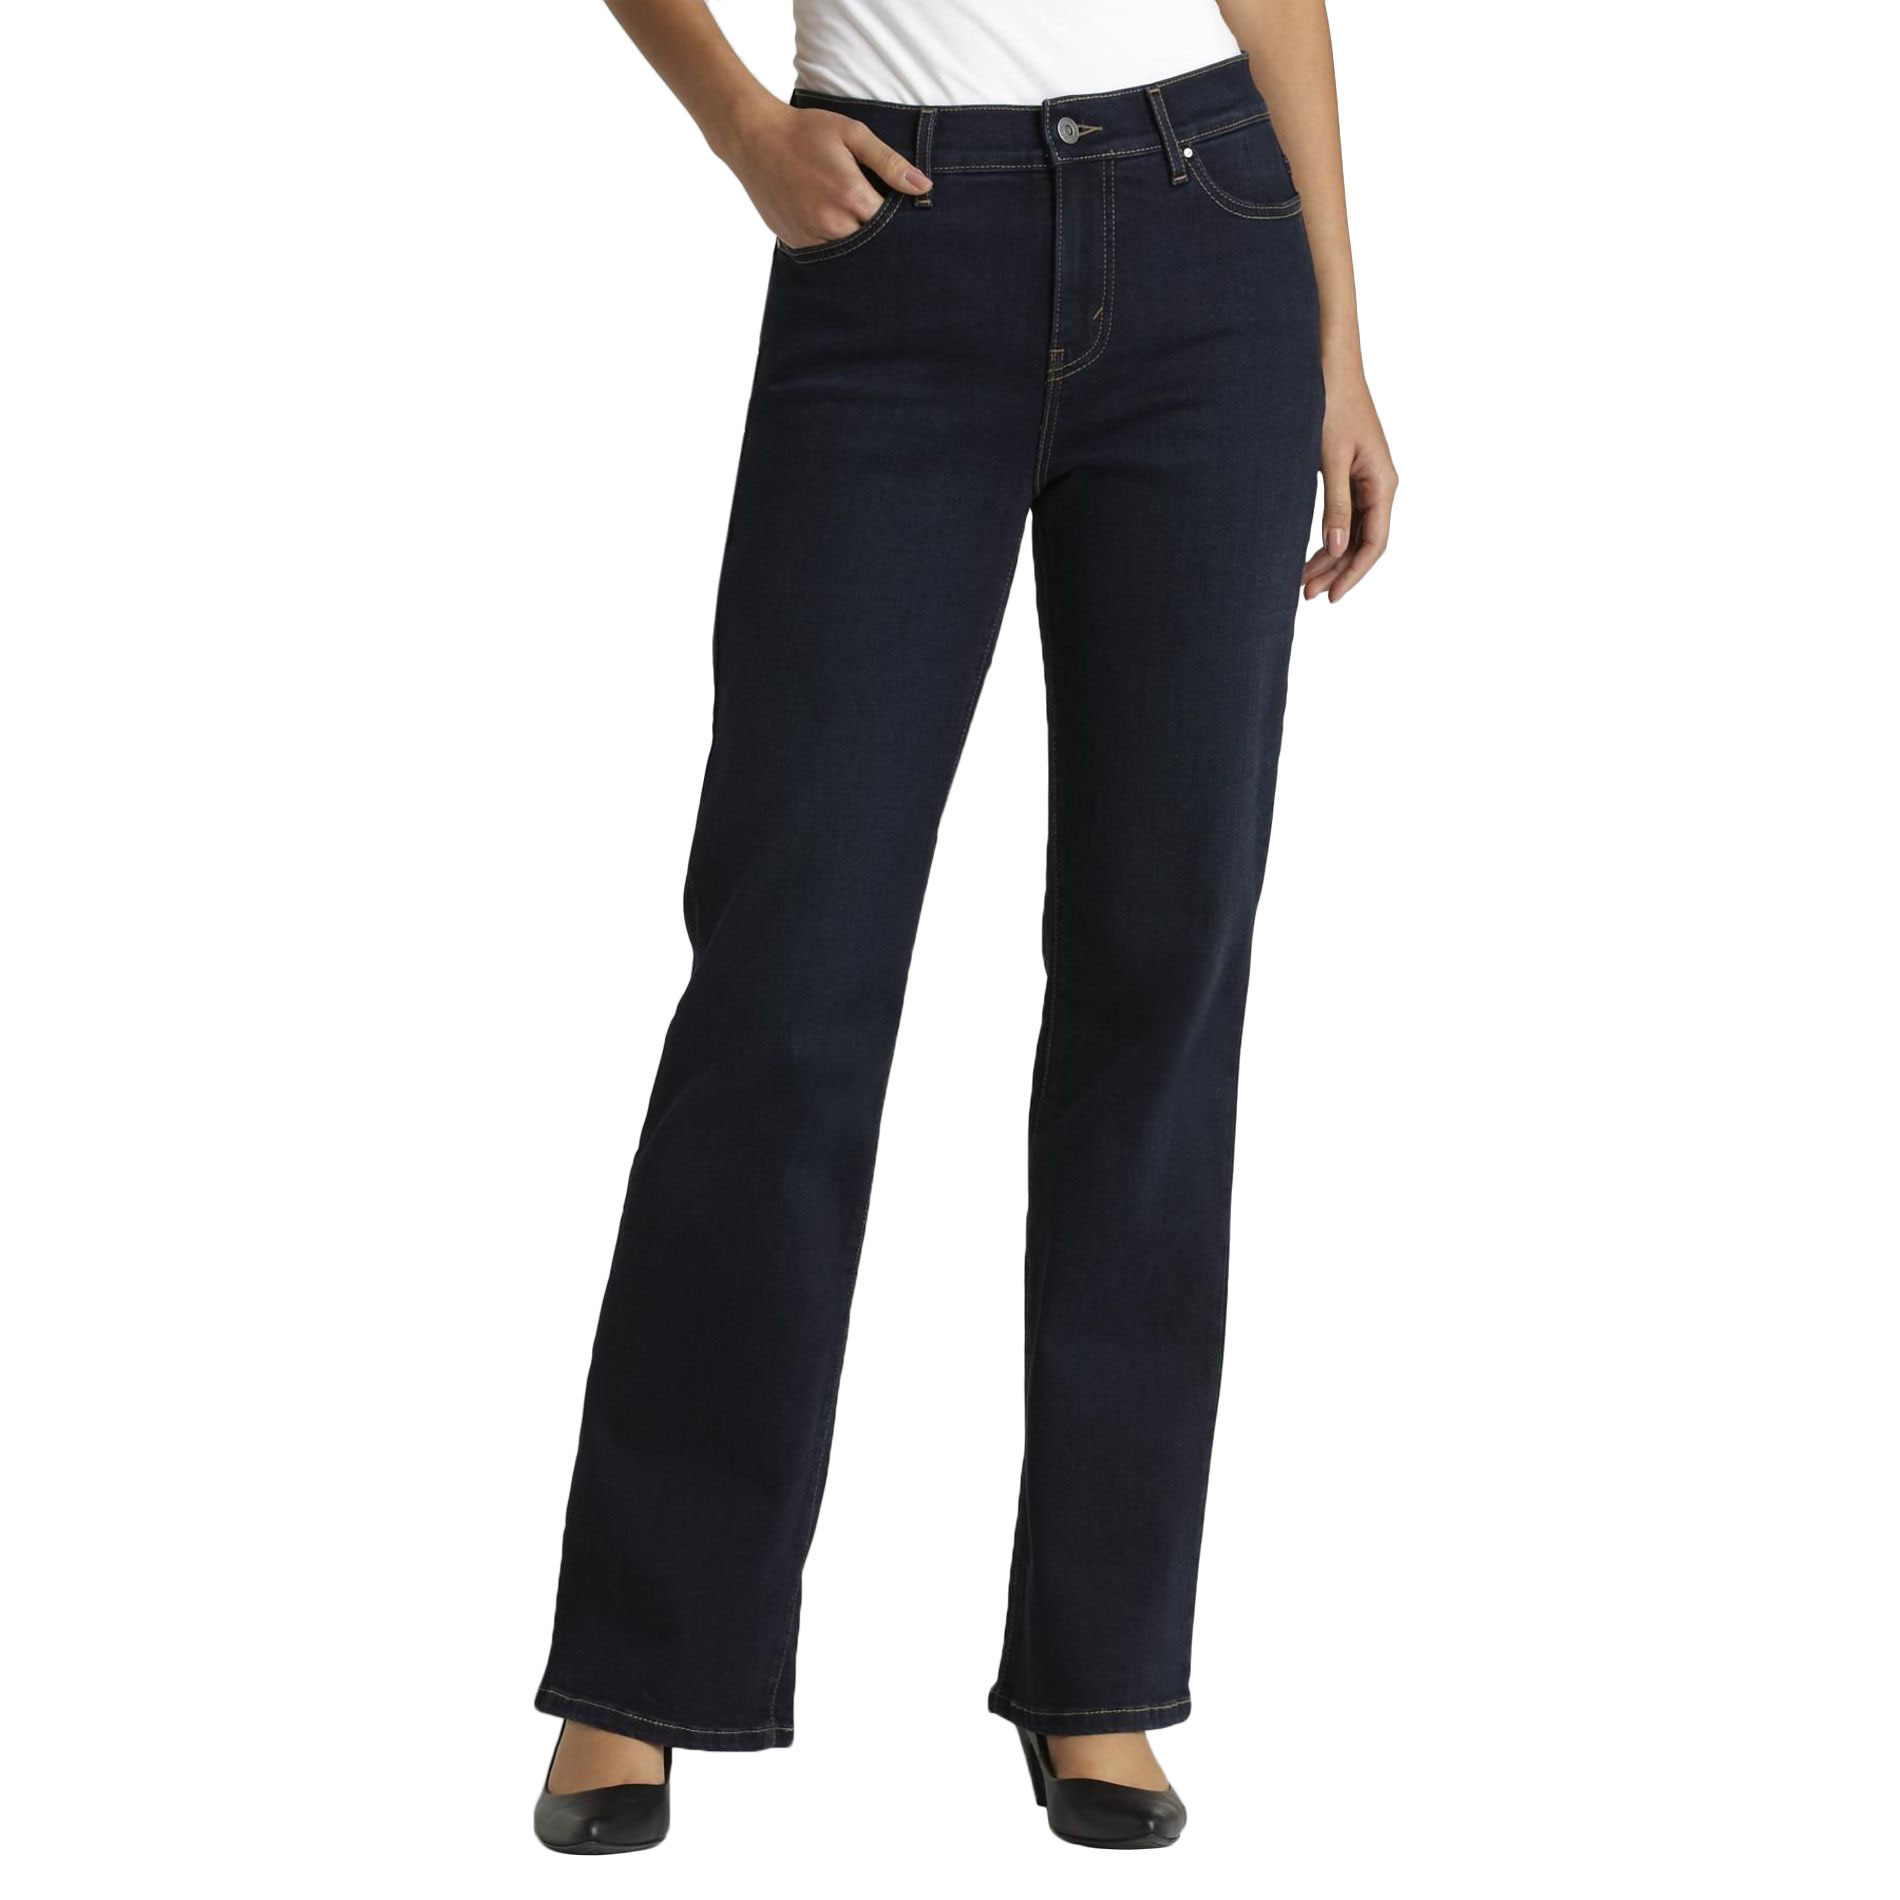 Levi's Women's 512™ Perfectly Slimming Boot Cut Denim Jeans